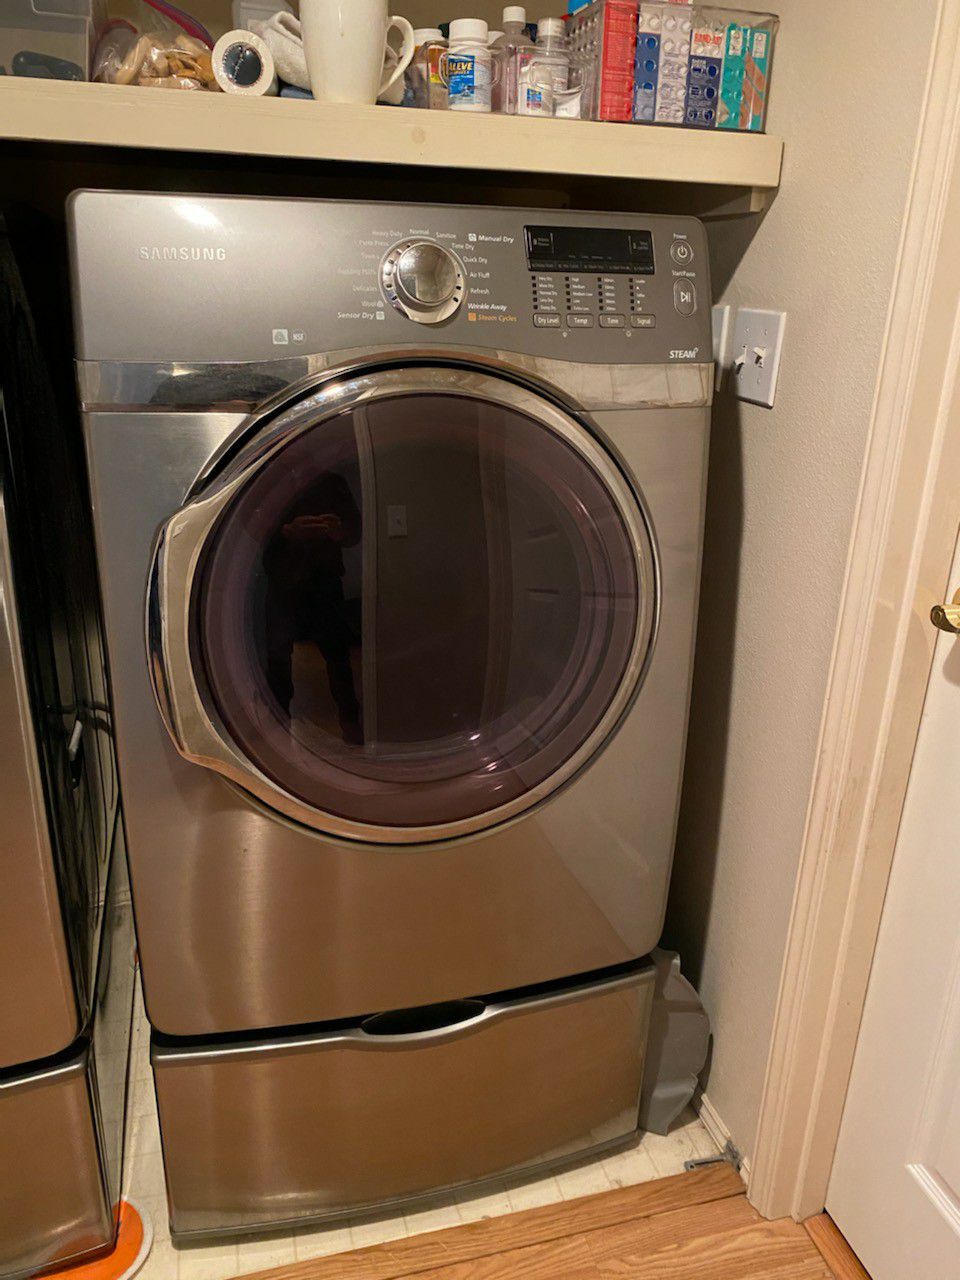 Washer and dryer Samsung